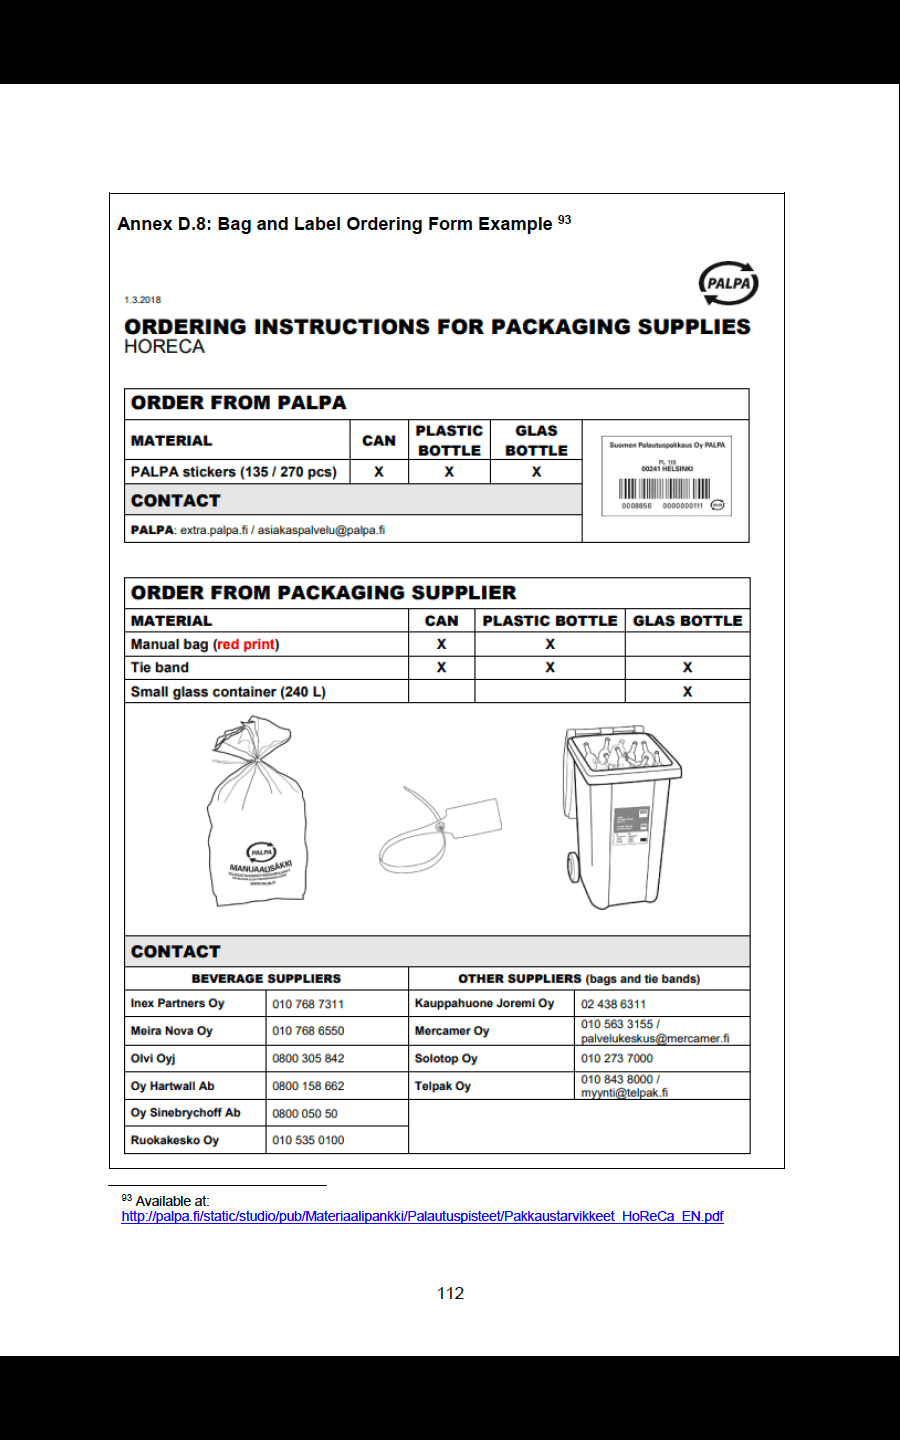 Bag and Label Ordering Form Example